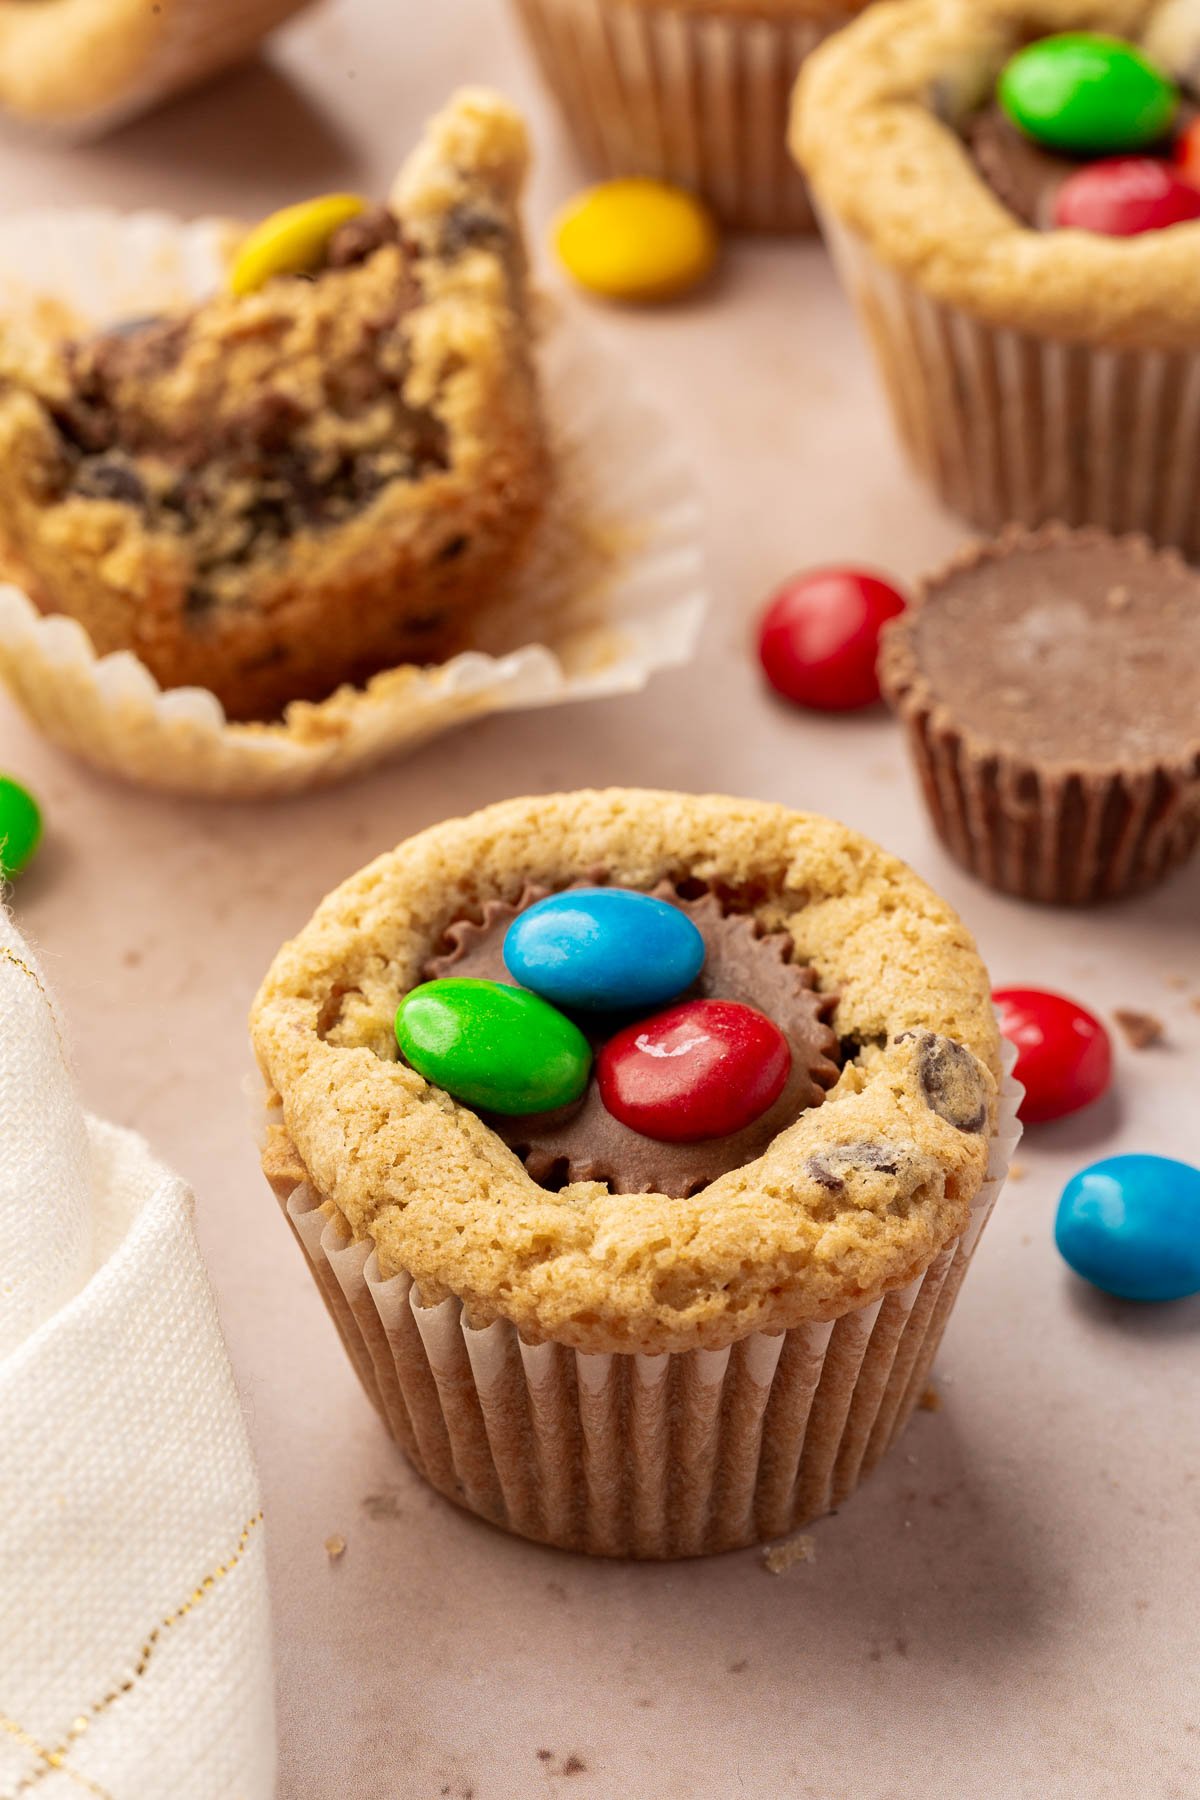 Chocolate chip cookie cup with a mini peanut butter cup inserted into the center and topped with three M&Ms.